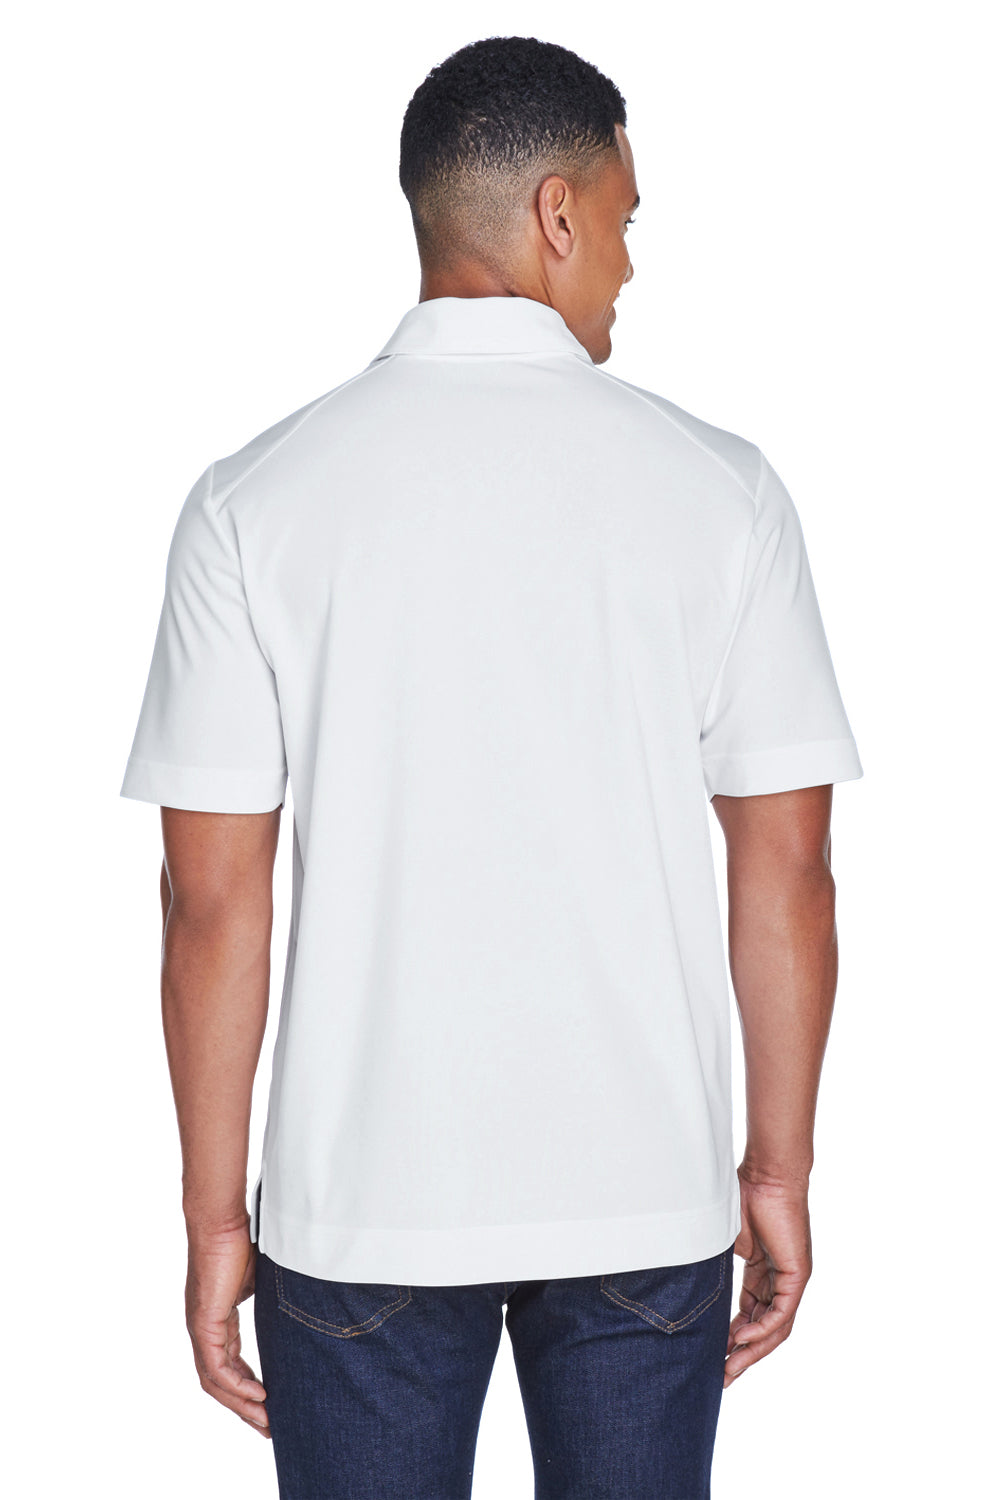 North End 88632 Mens Sport Red Performance Moisture Wicking Short Sleeve Polo Shirt White Back